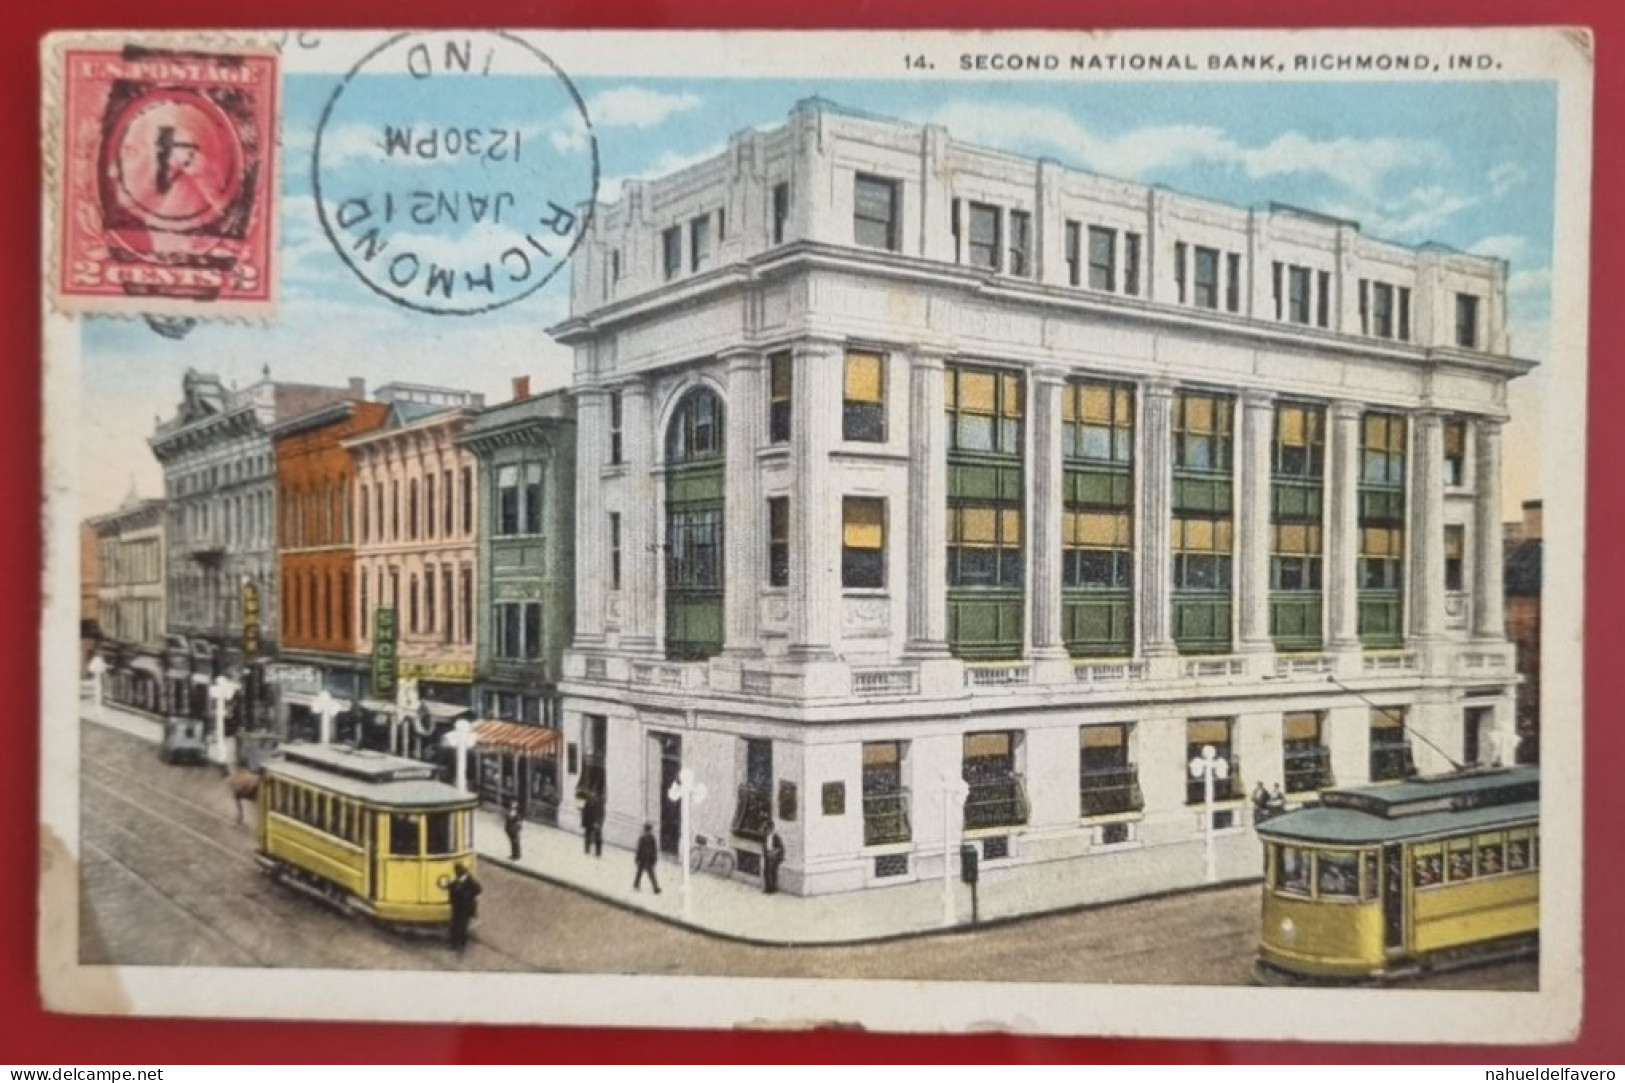 Carte Postale Diffusée 1919 - United States - Second National Bank, Richmond, IND - Fort Wayne